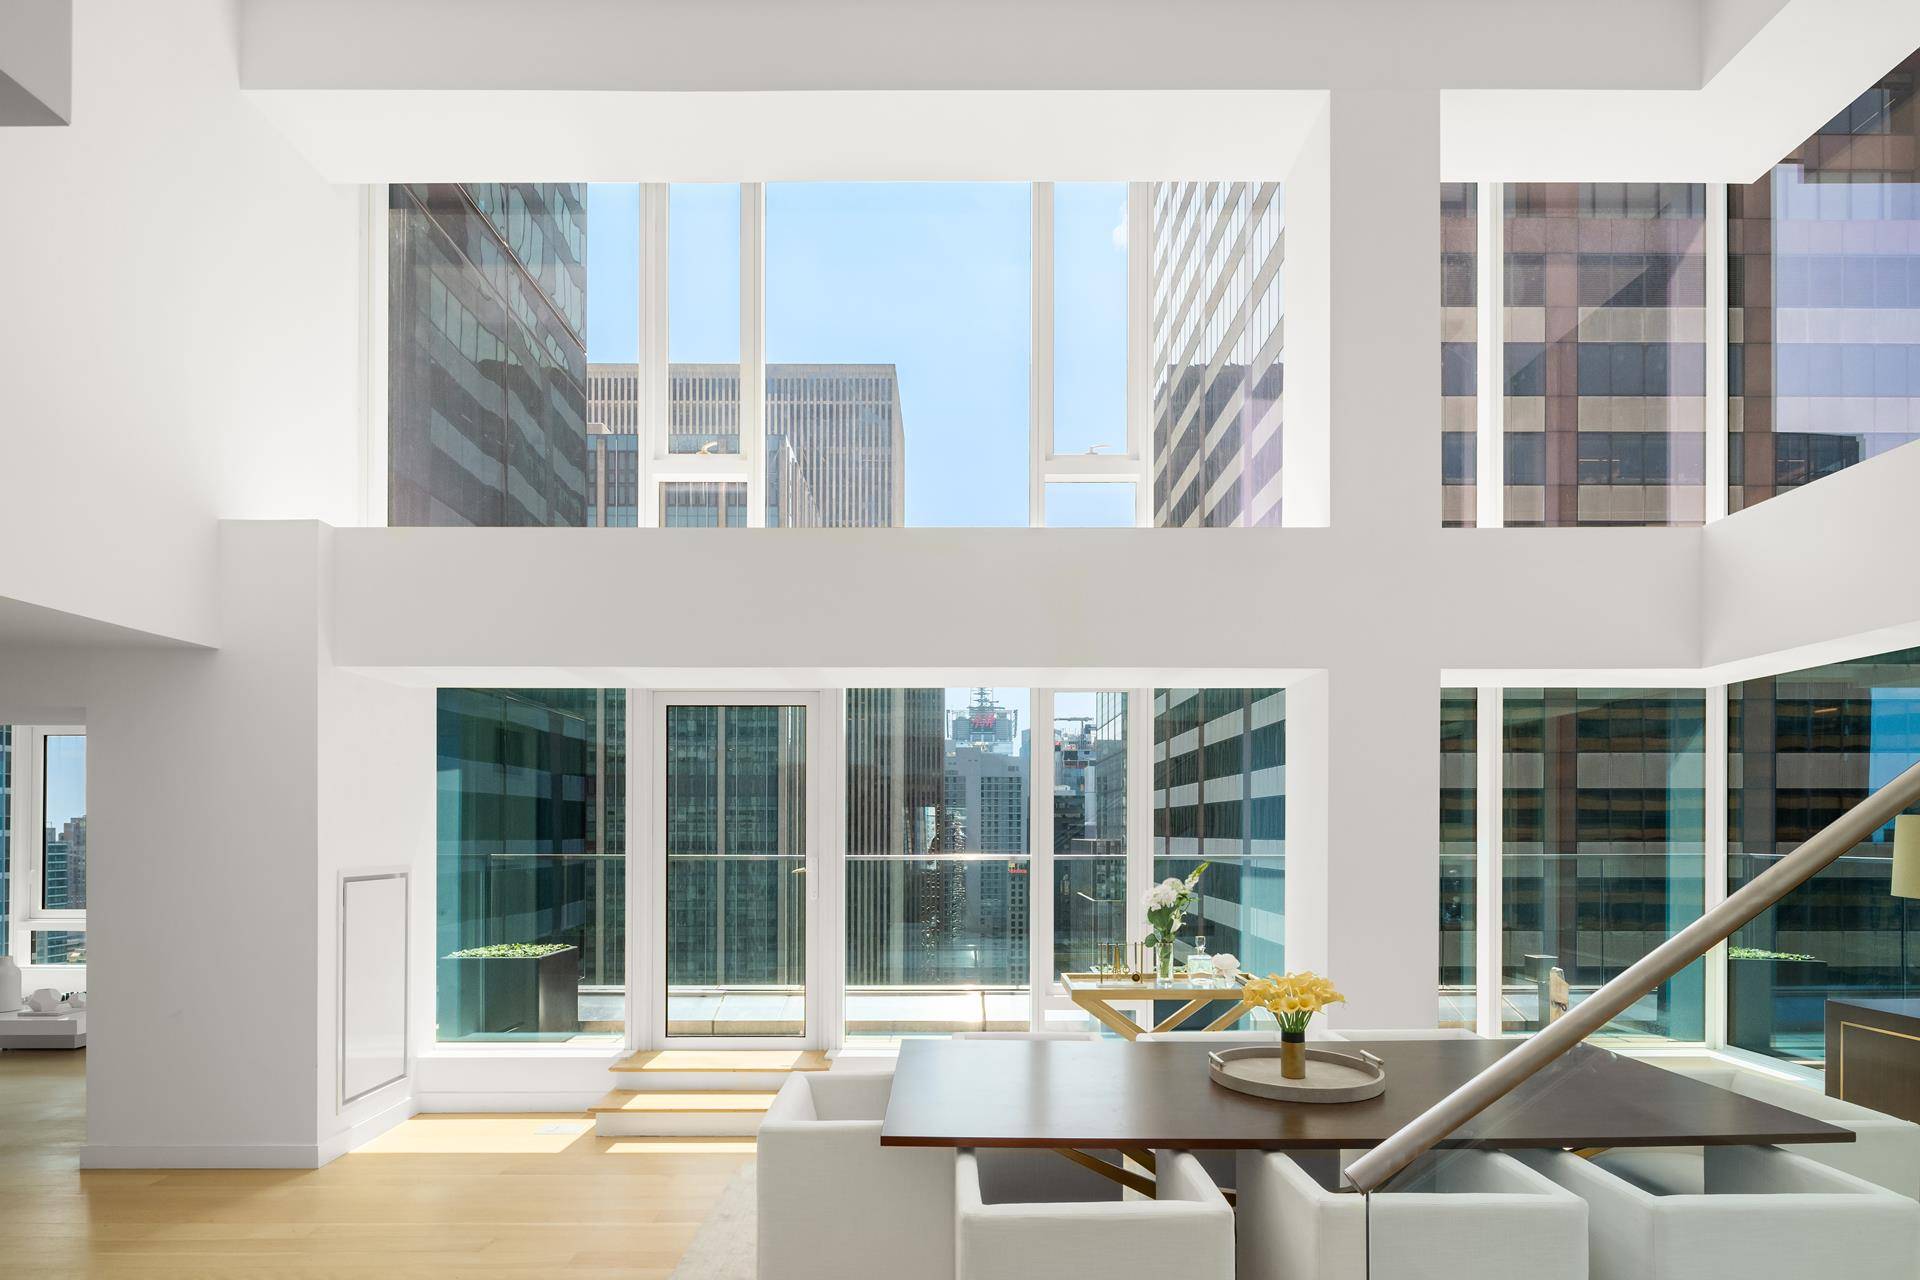 This extraordinary duplex penthouse soaring high above Midtown will take your breath away with its jaw dropping city views, meticulously designed interiors, and generous private outdoor space.